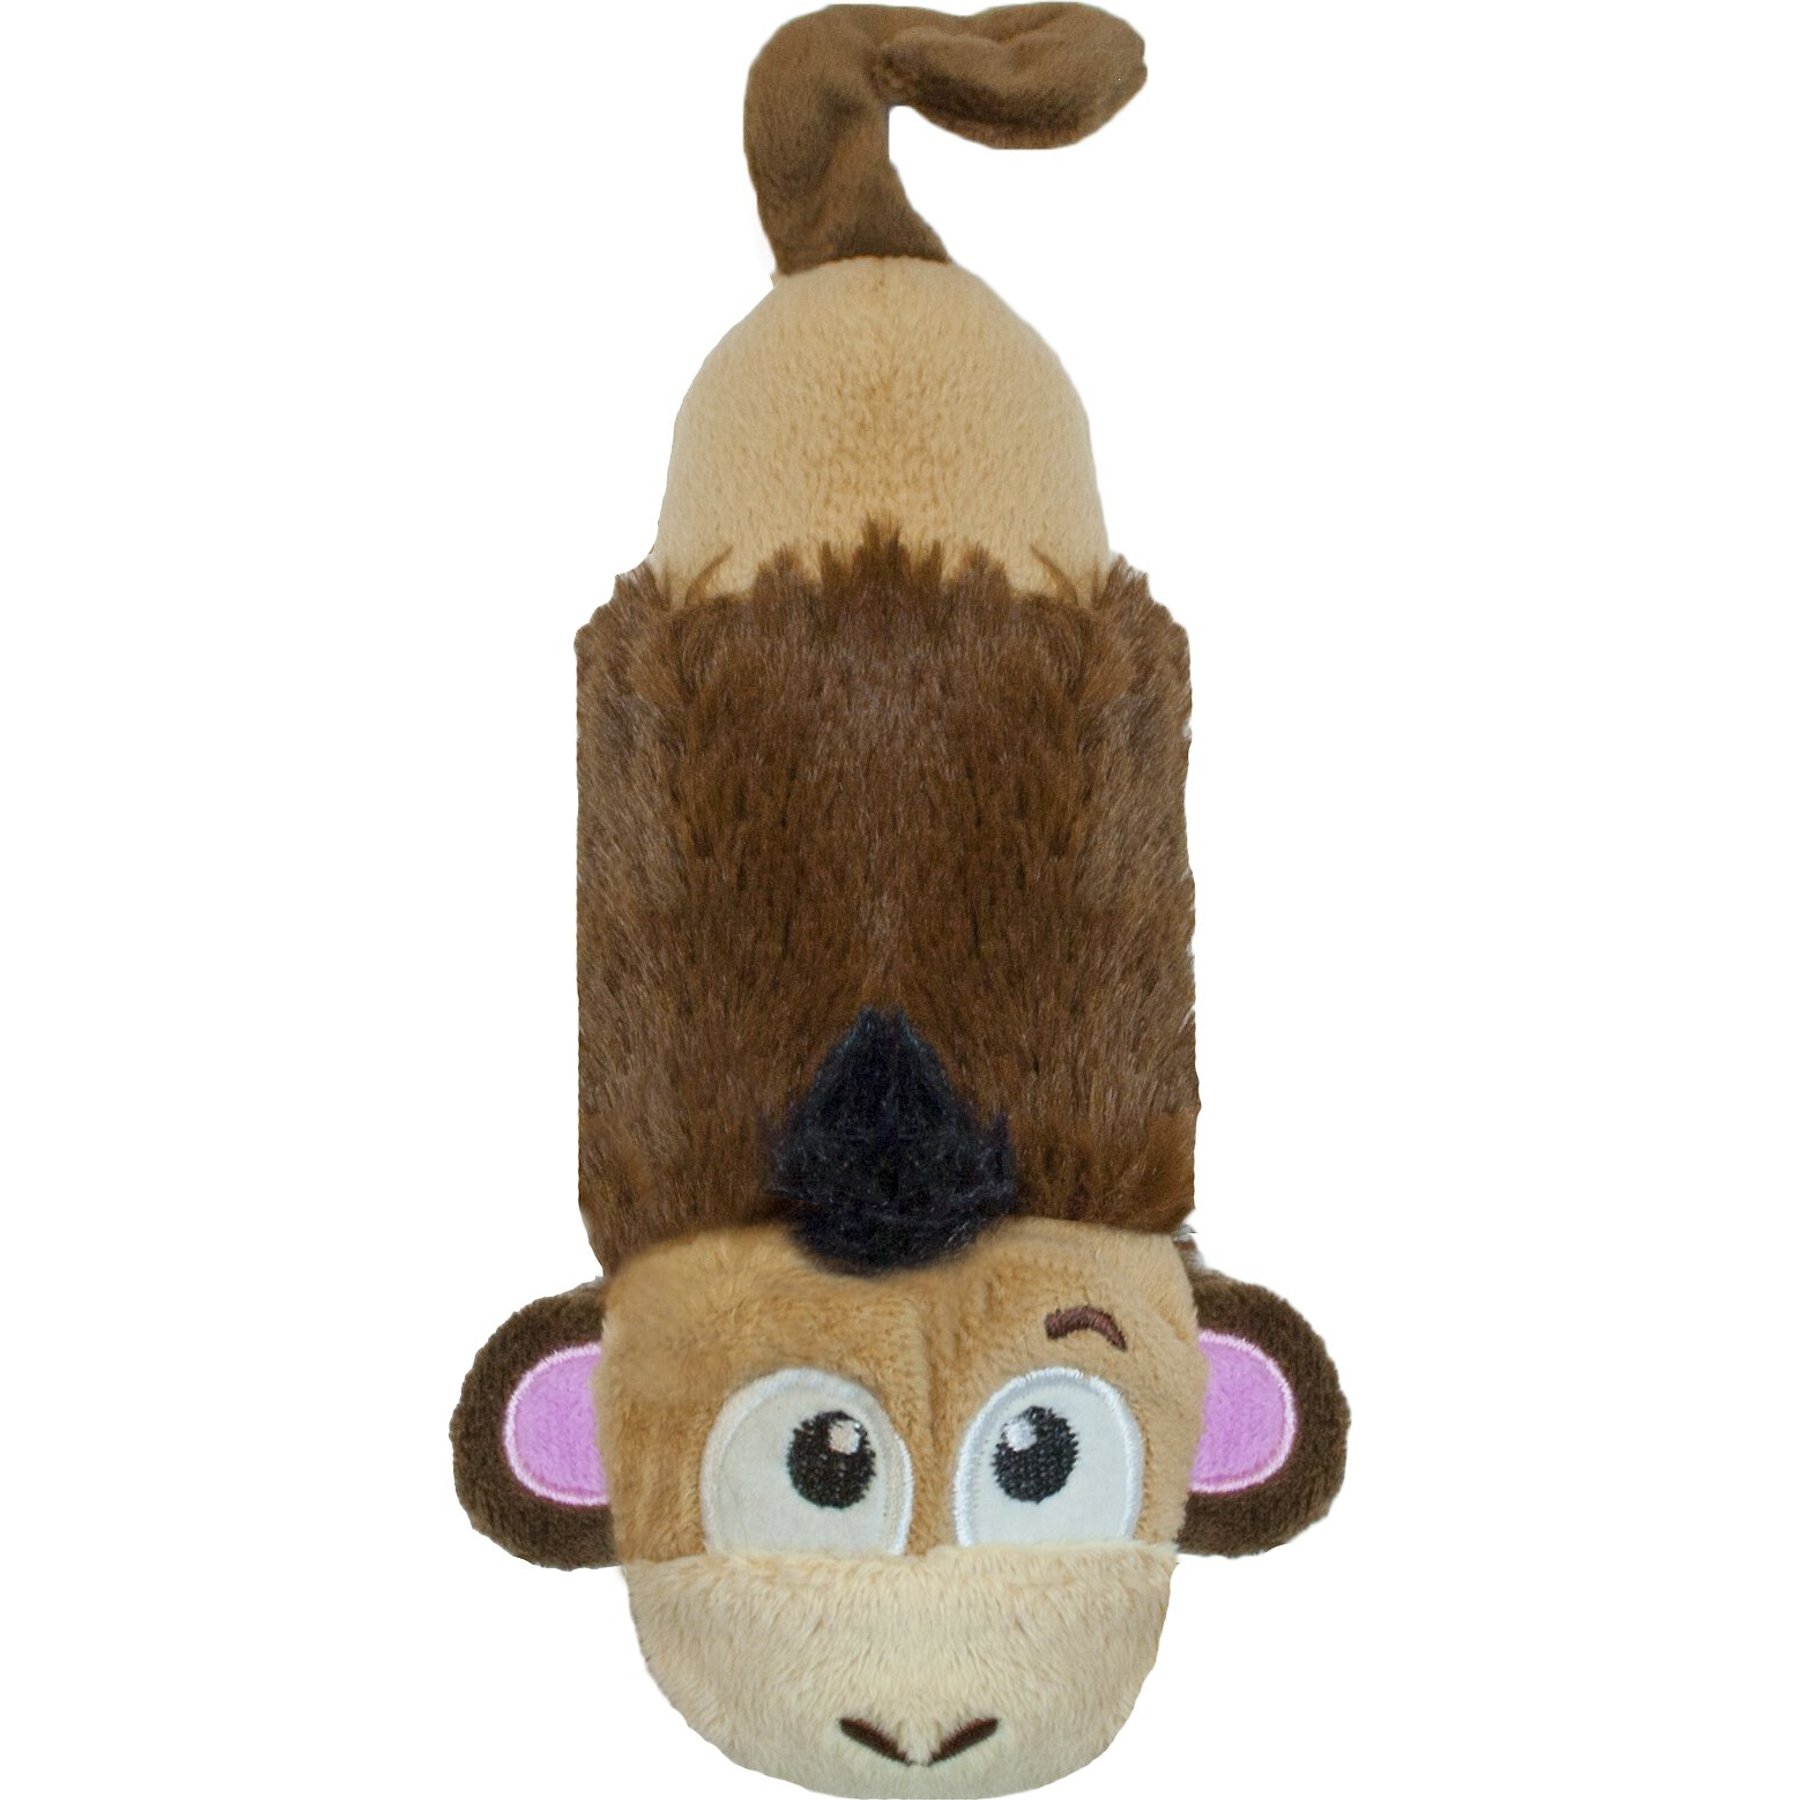 FGA MARKETPLACE Monkey - Frog Flat NO Stuffing NO Squeak Plush Dog Toy,  Funny Style Will Entertain Your Dog for Hours, Recommended for Small and